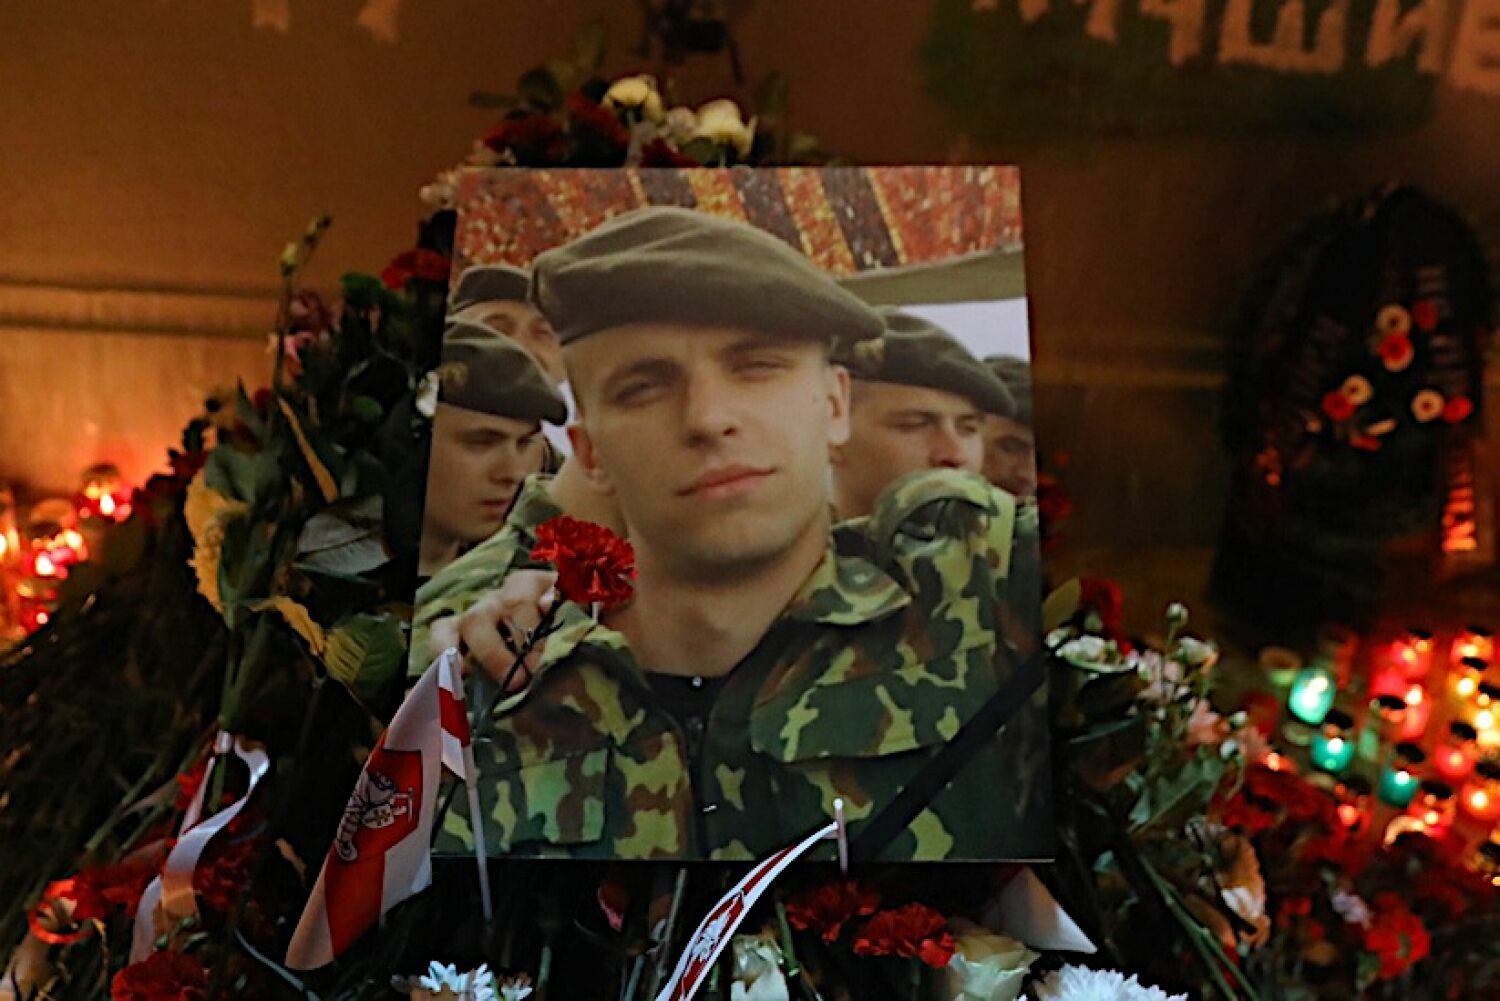 Street in Washington to be named in honor of Belarusian Roman Bondarenko killed by security forces